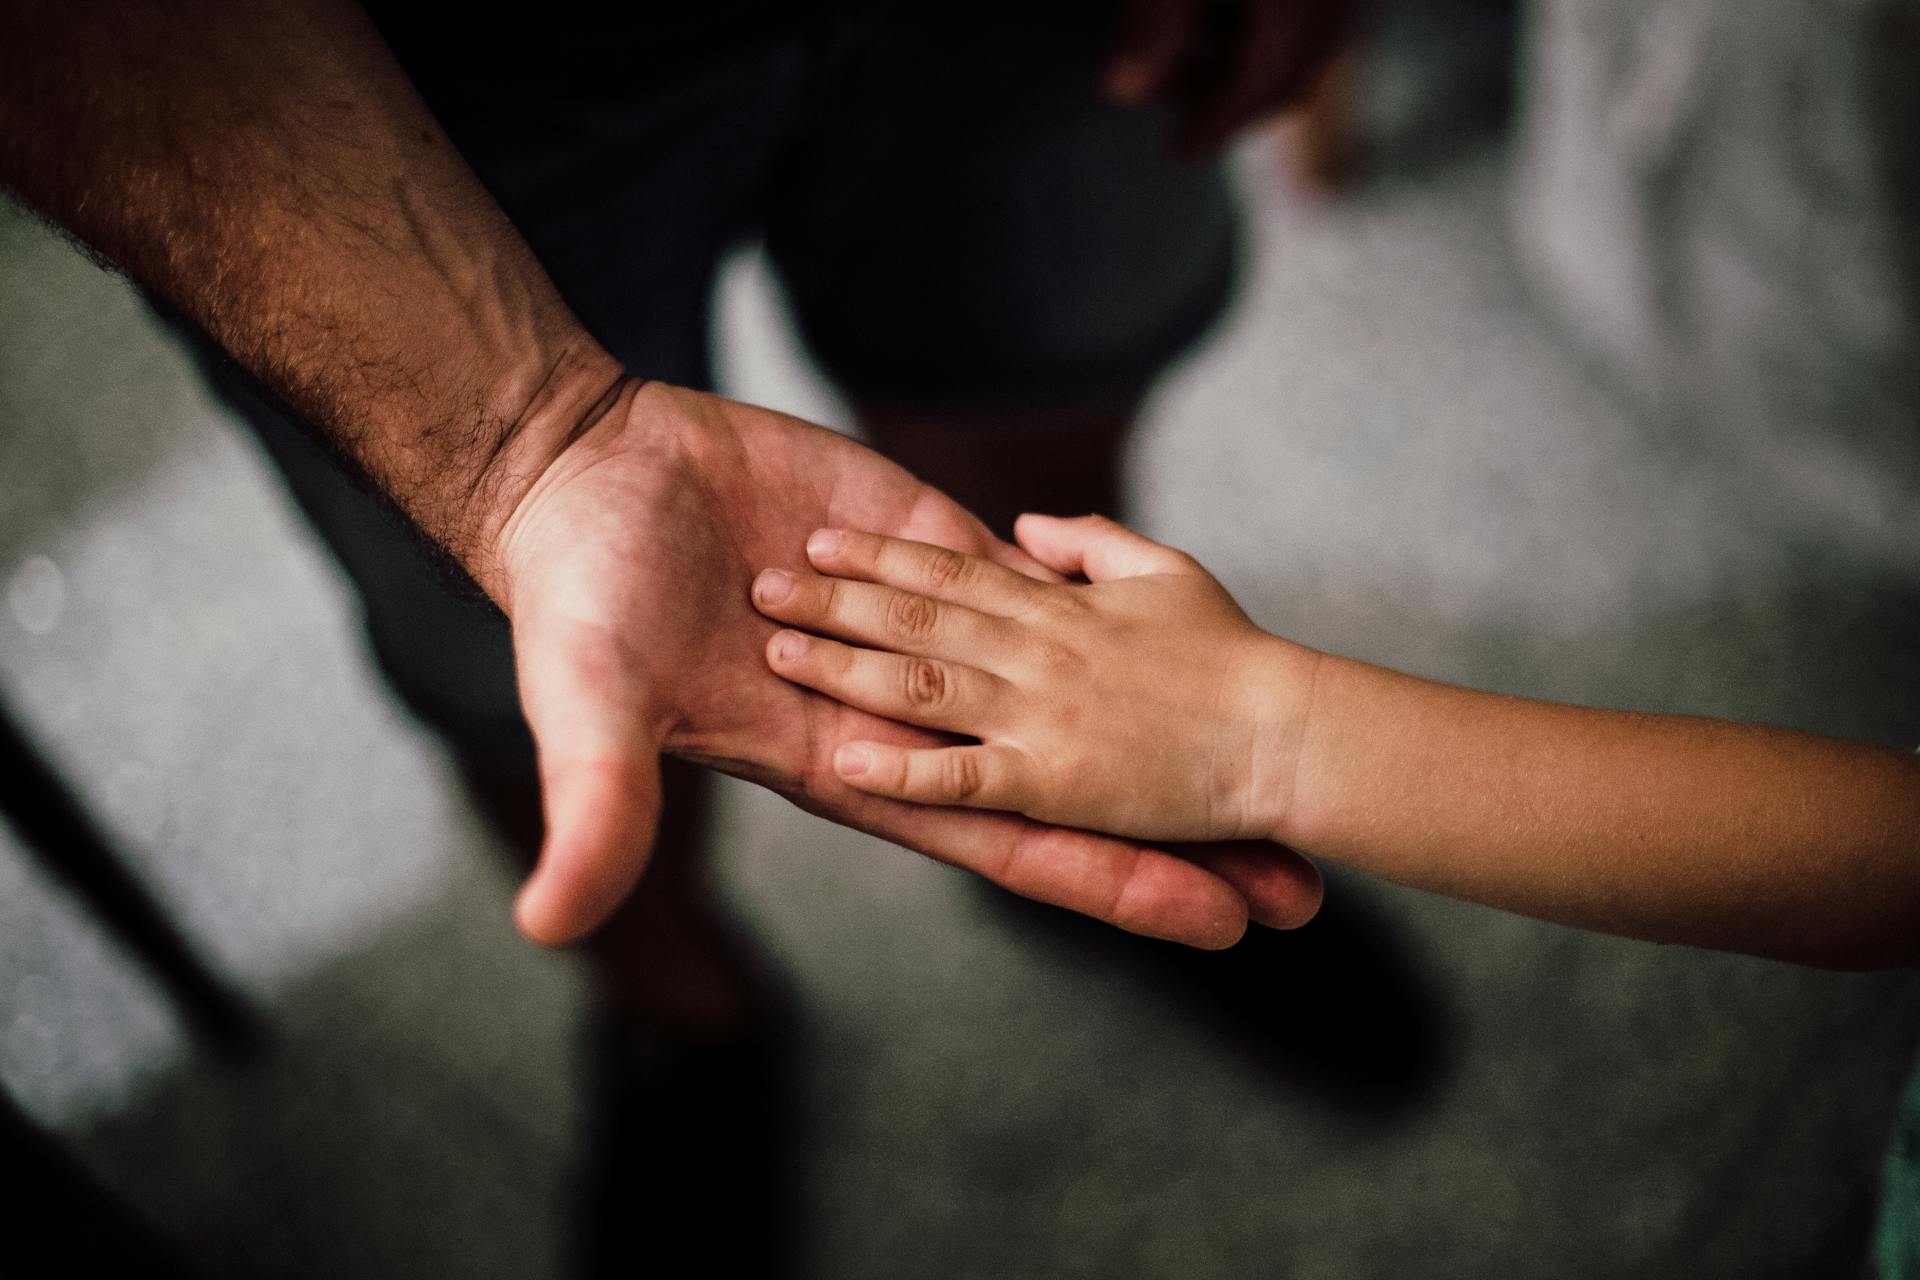 Father and son holding hands | Source: Pexels